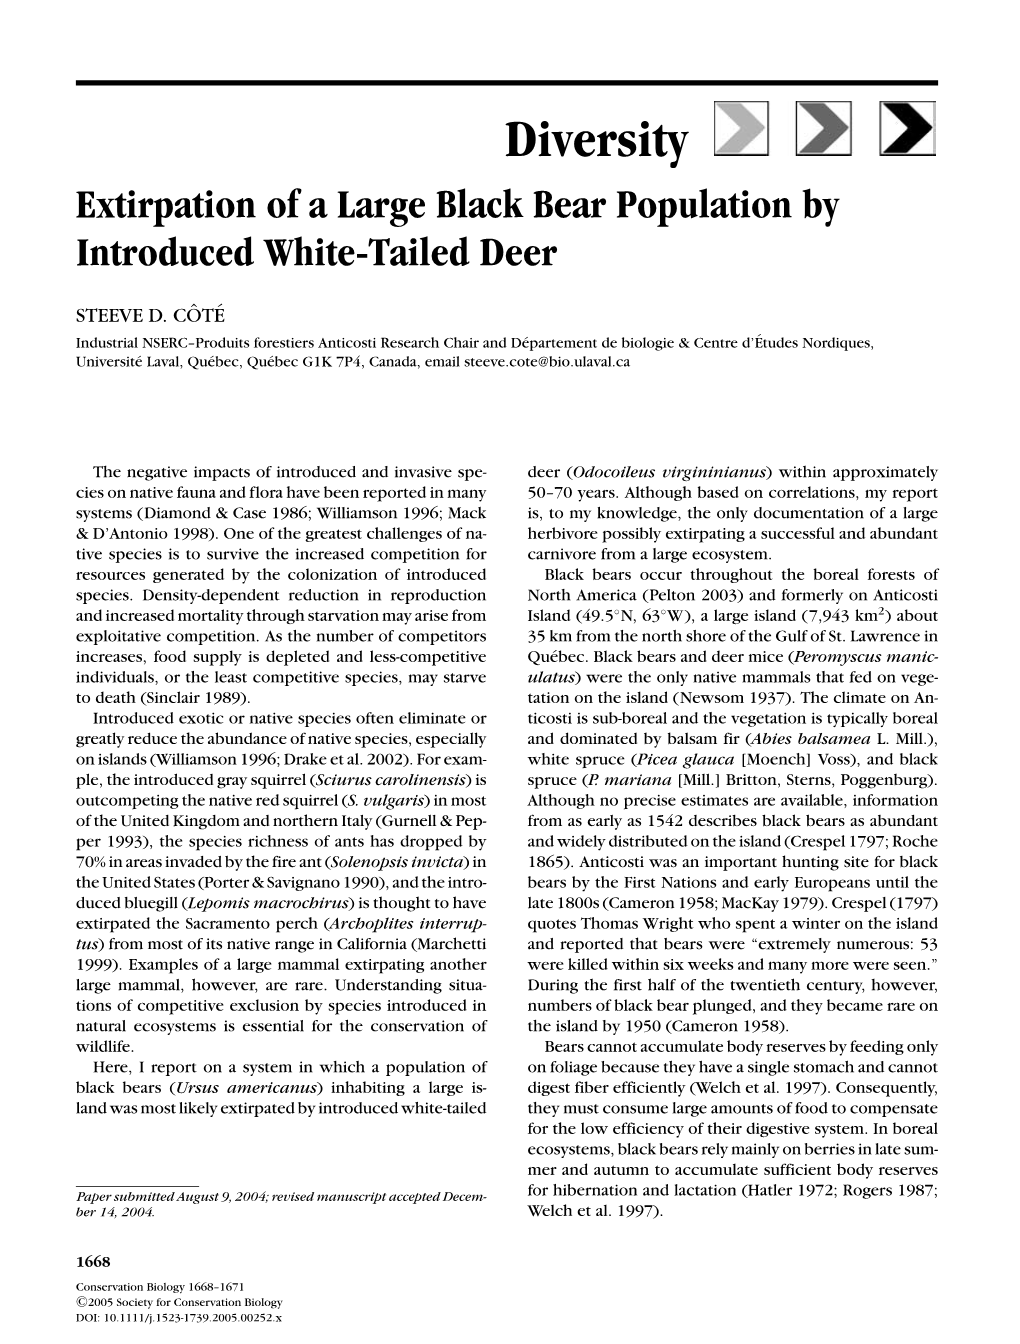 Diversity Extirpation of a Large Black Bear Population by Introduced White-Tailed Deer